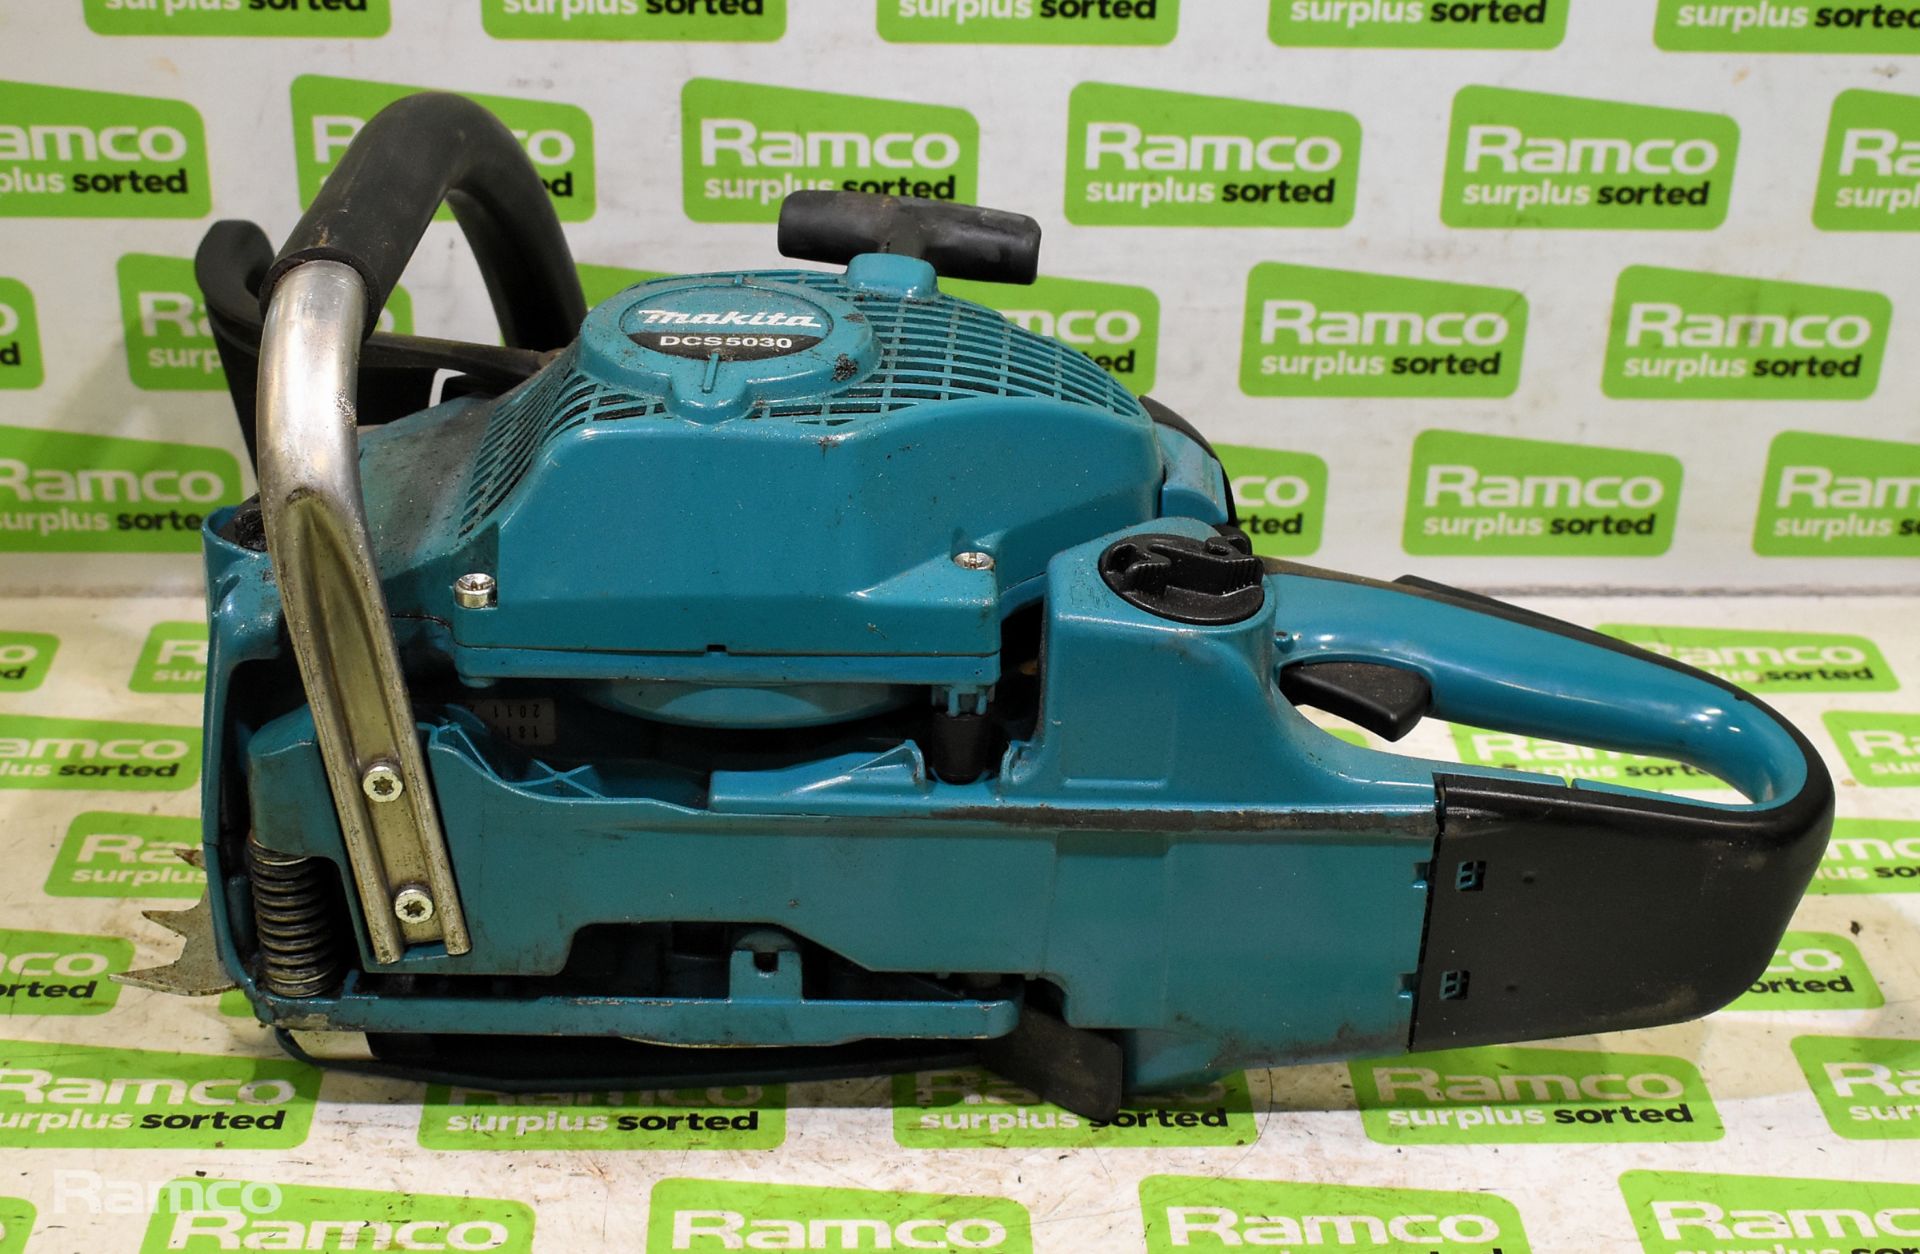 6x Makita DCS5030 50cc petrol chainsaw - BODIES ONLY - AS SPARES & REPAIRS - Image 28 of 33